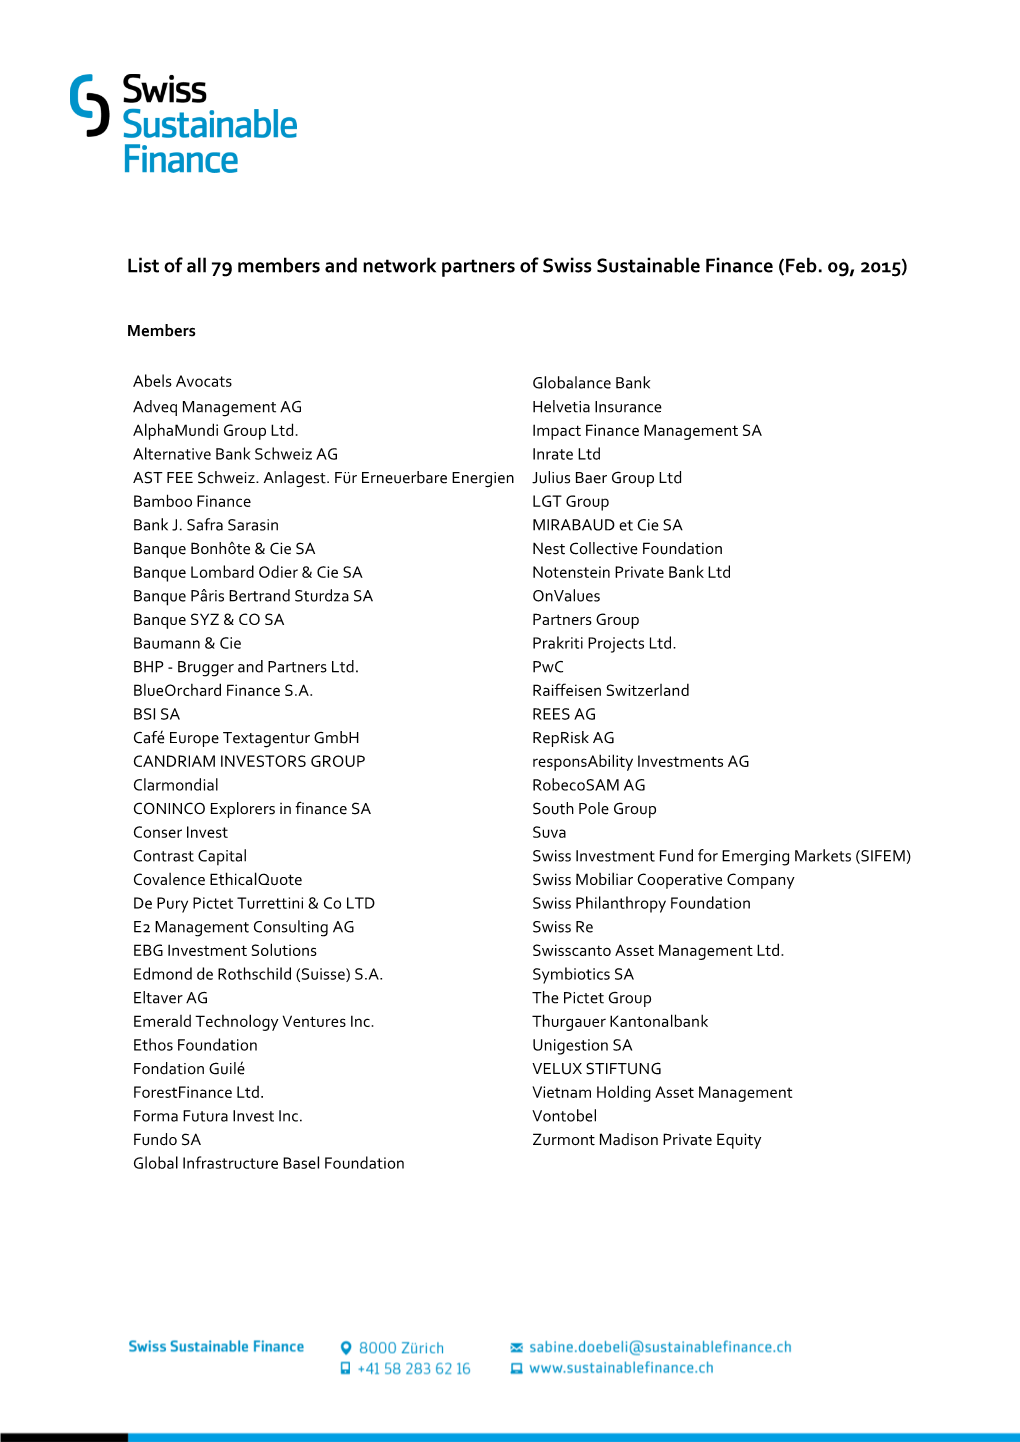 List of All 79 Members and Network Partners of Swiss Sustainable Finance (Feb